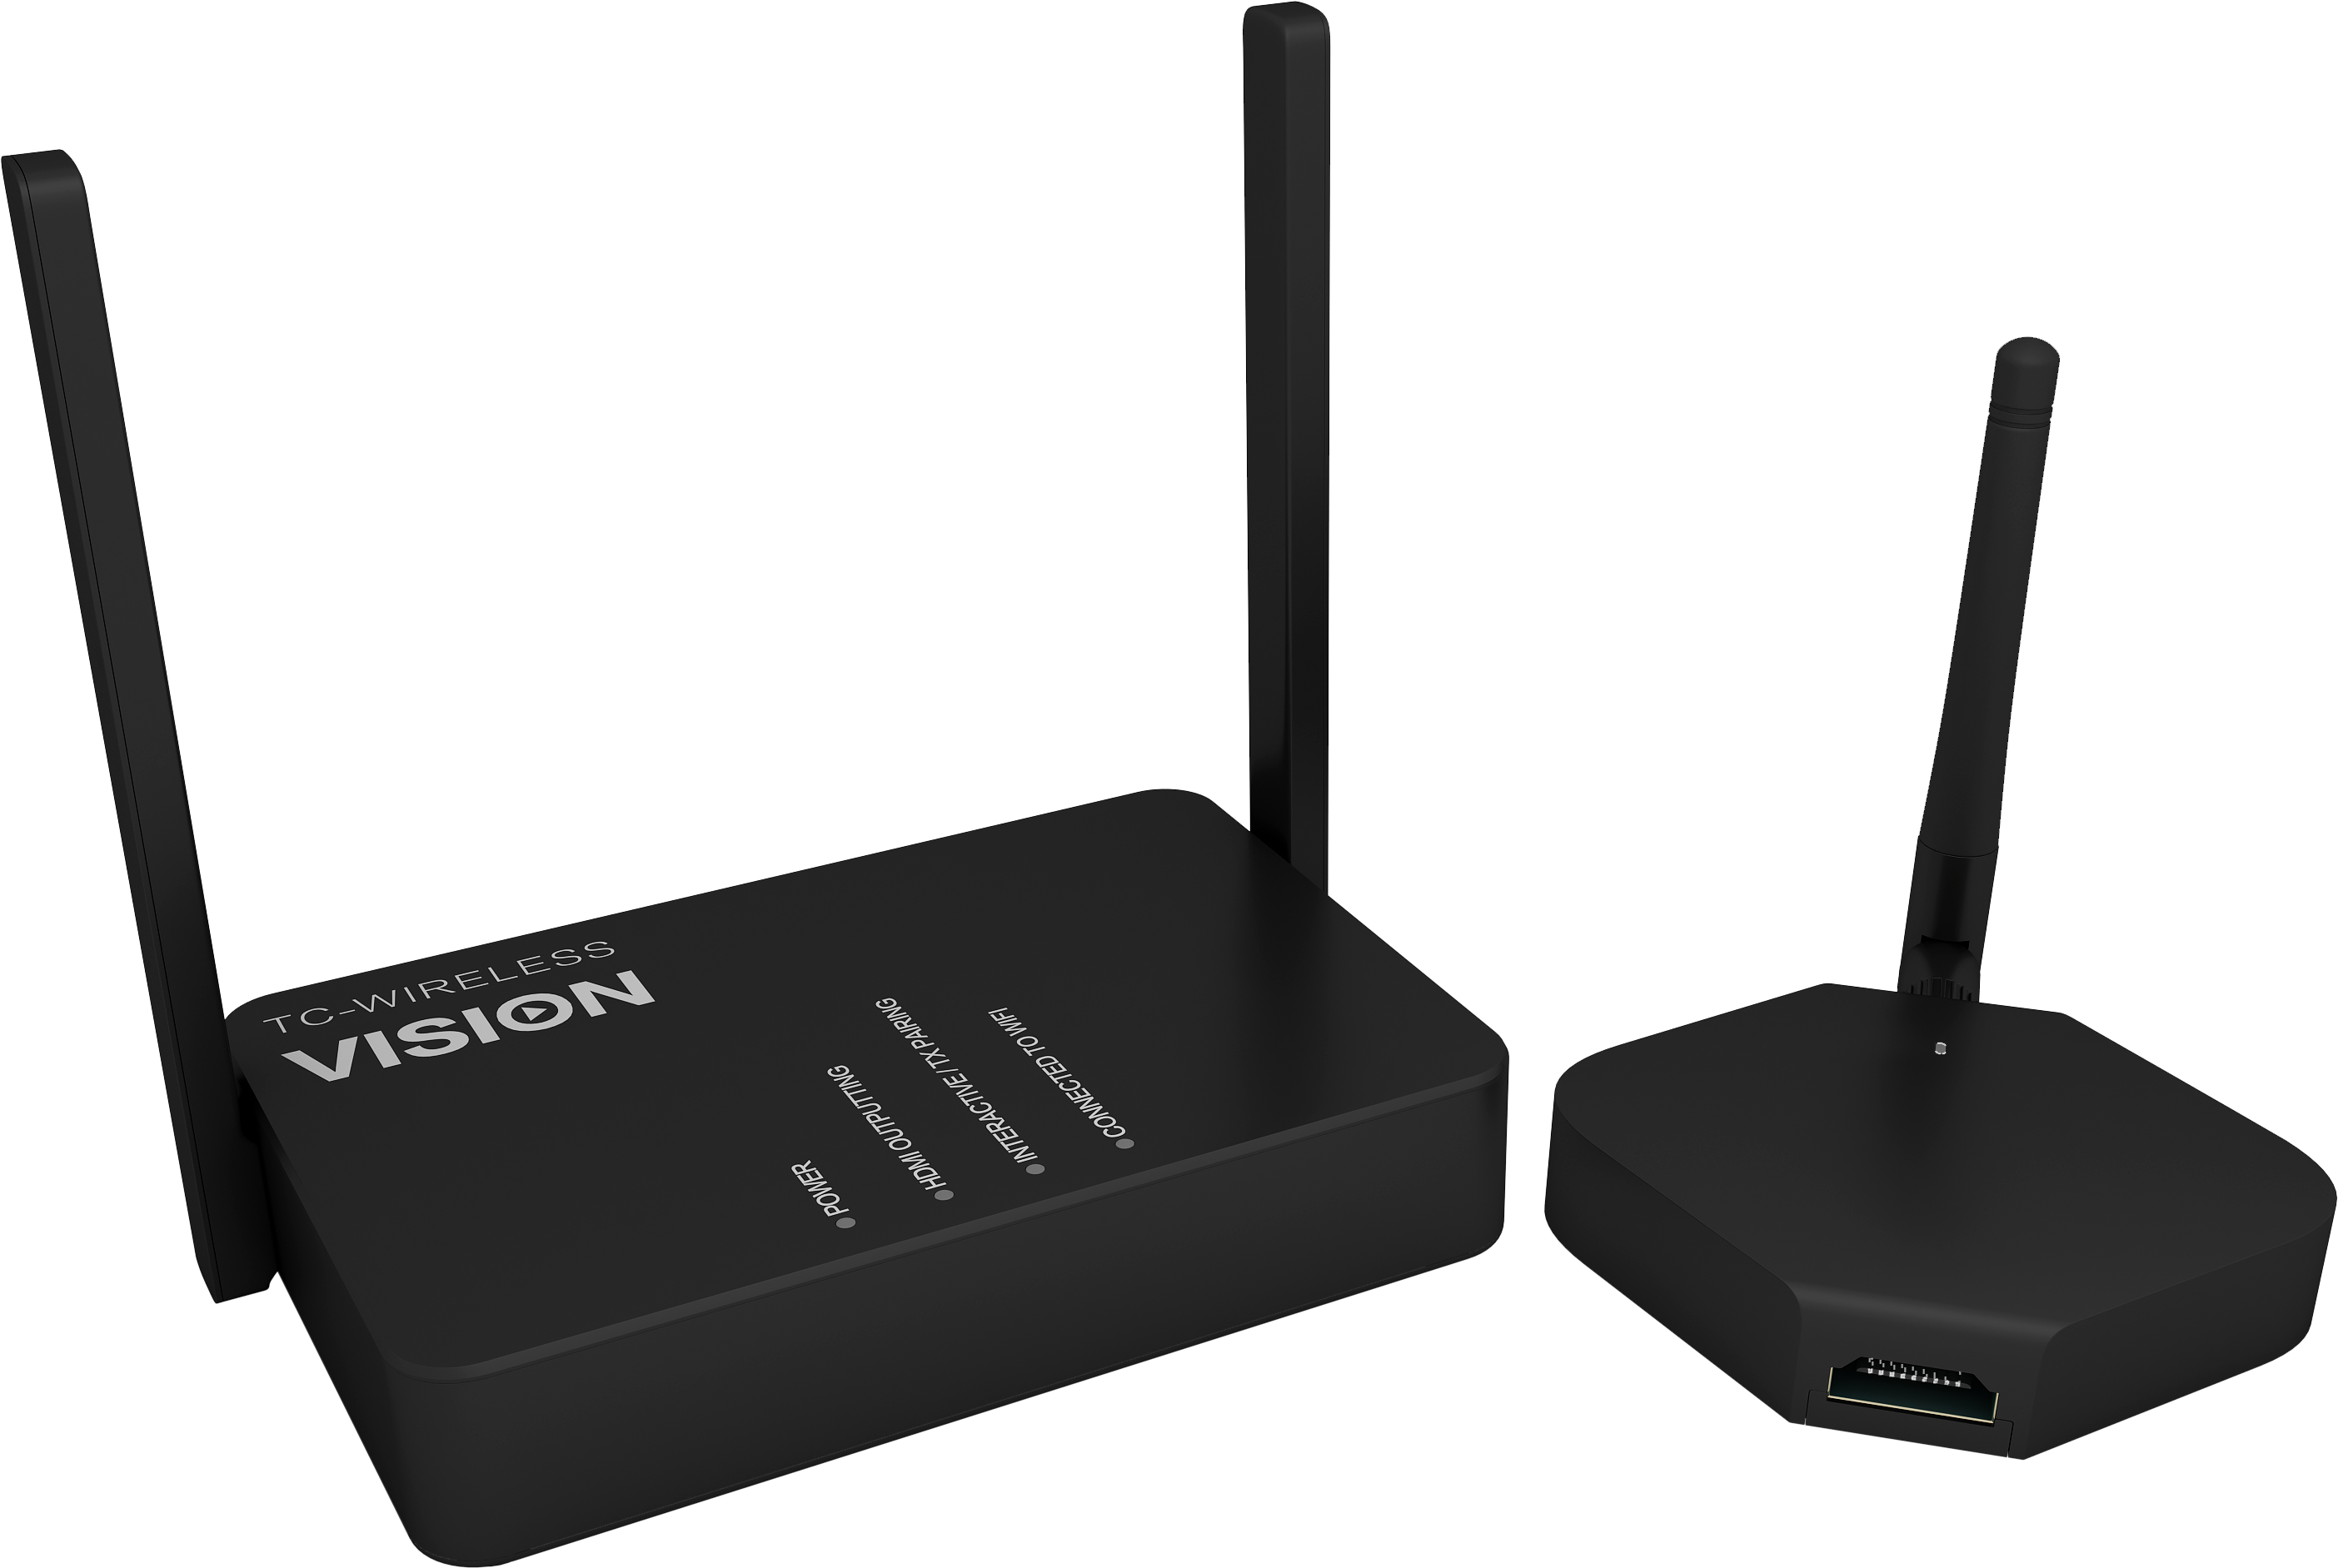 Vision first to market with wireless HDMI and USB